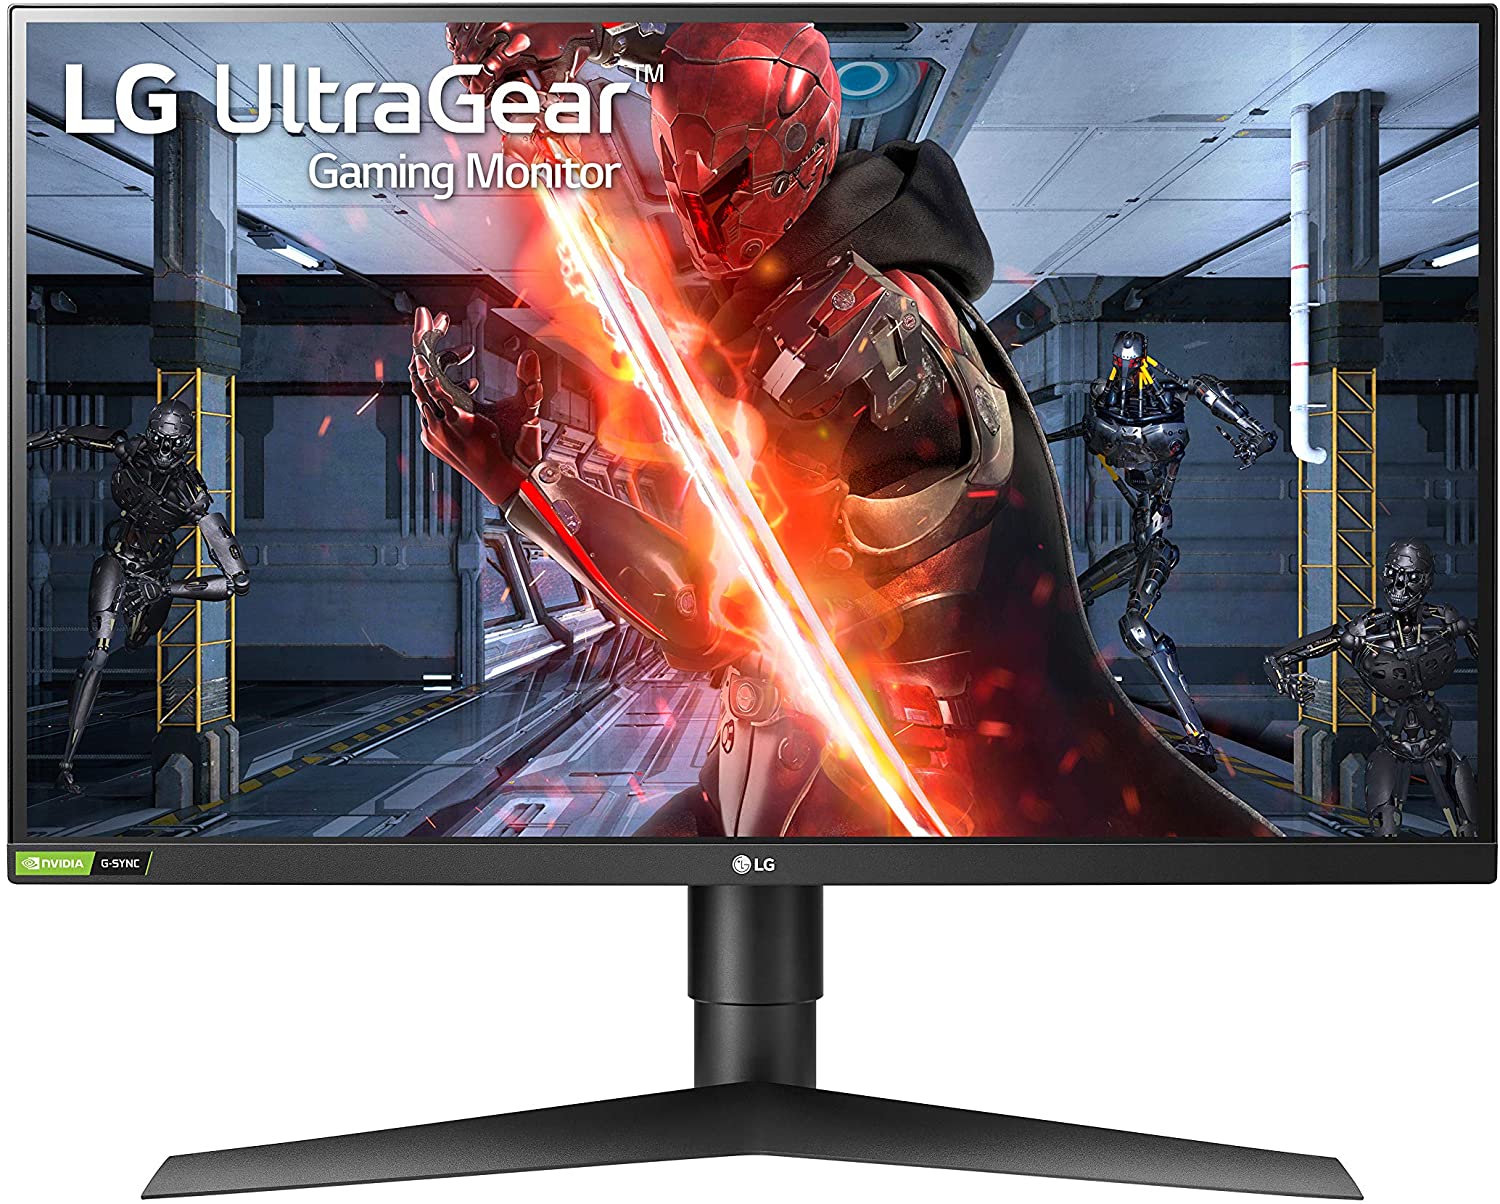 LG 27GN750-B GAMING MONITOR WITH 240HZ REFRESH RATE